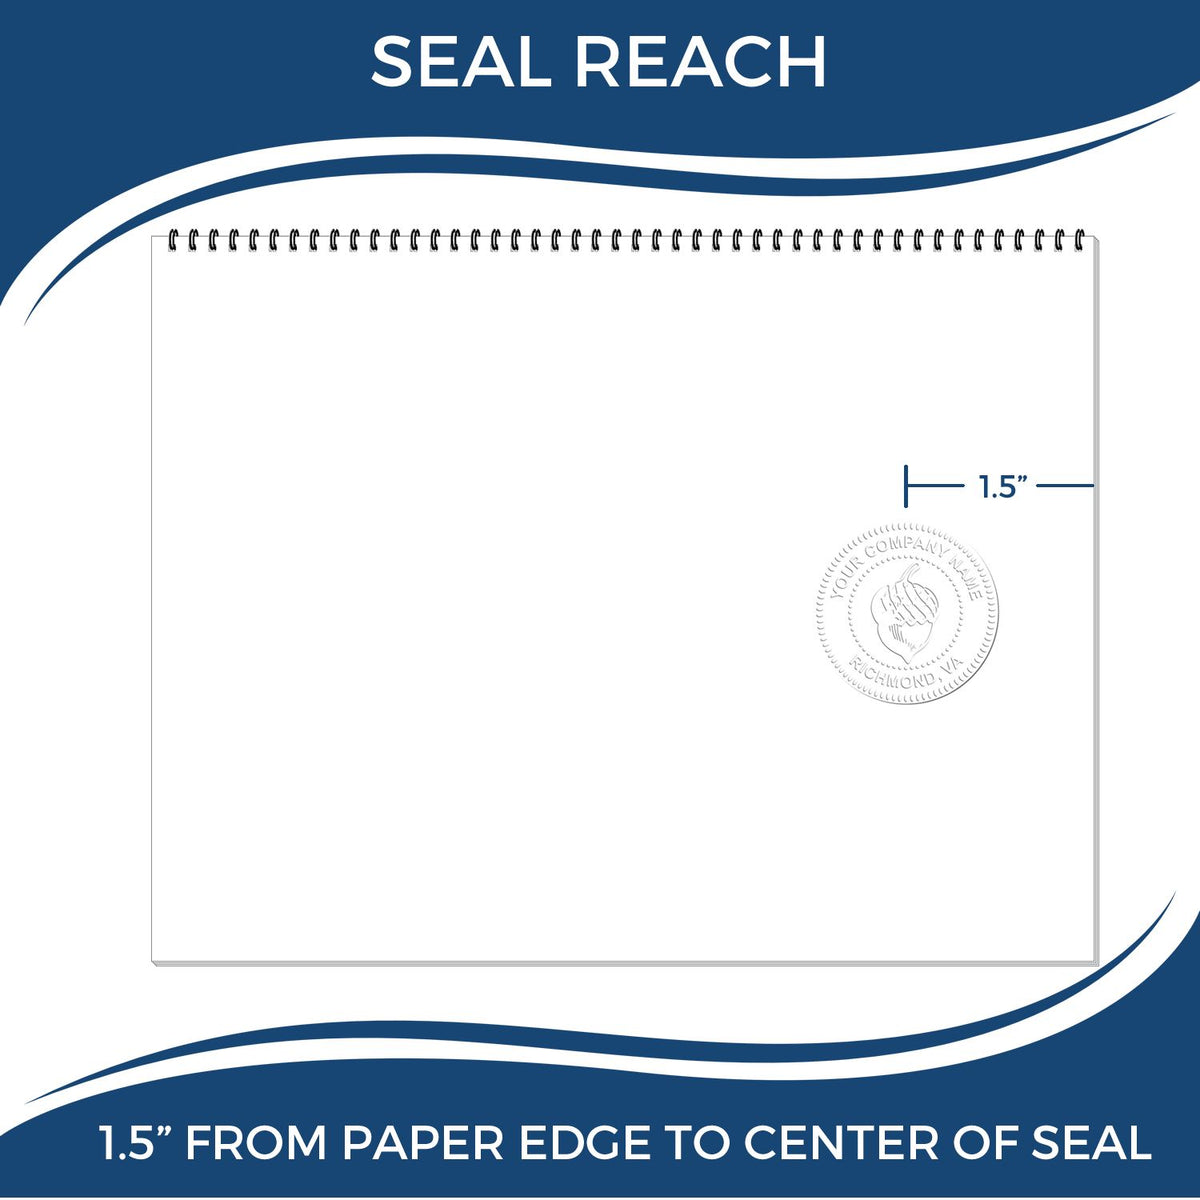 An infographic showing the seal reach which is represented by a ruler and a miniature seal image of the Gift Idaho Landscape Architect Seal